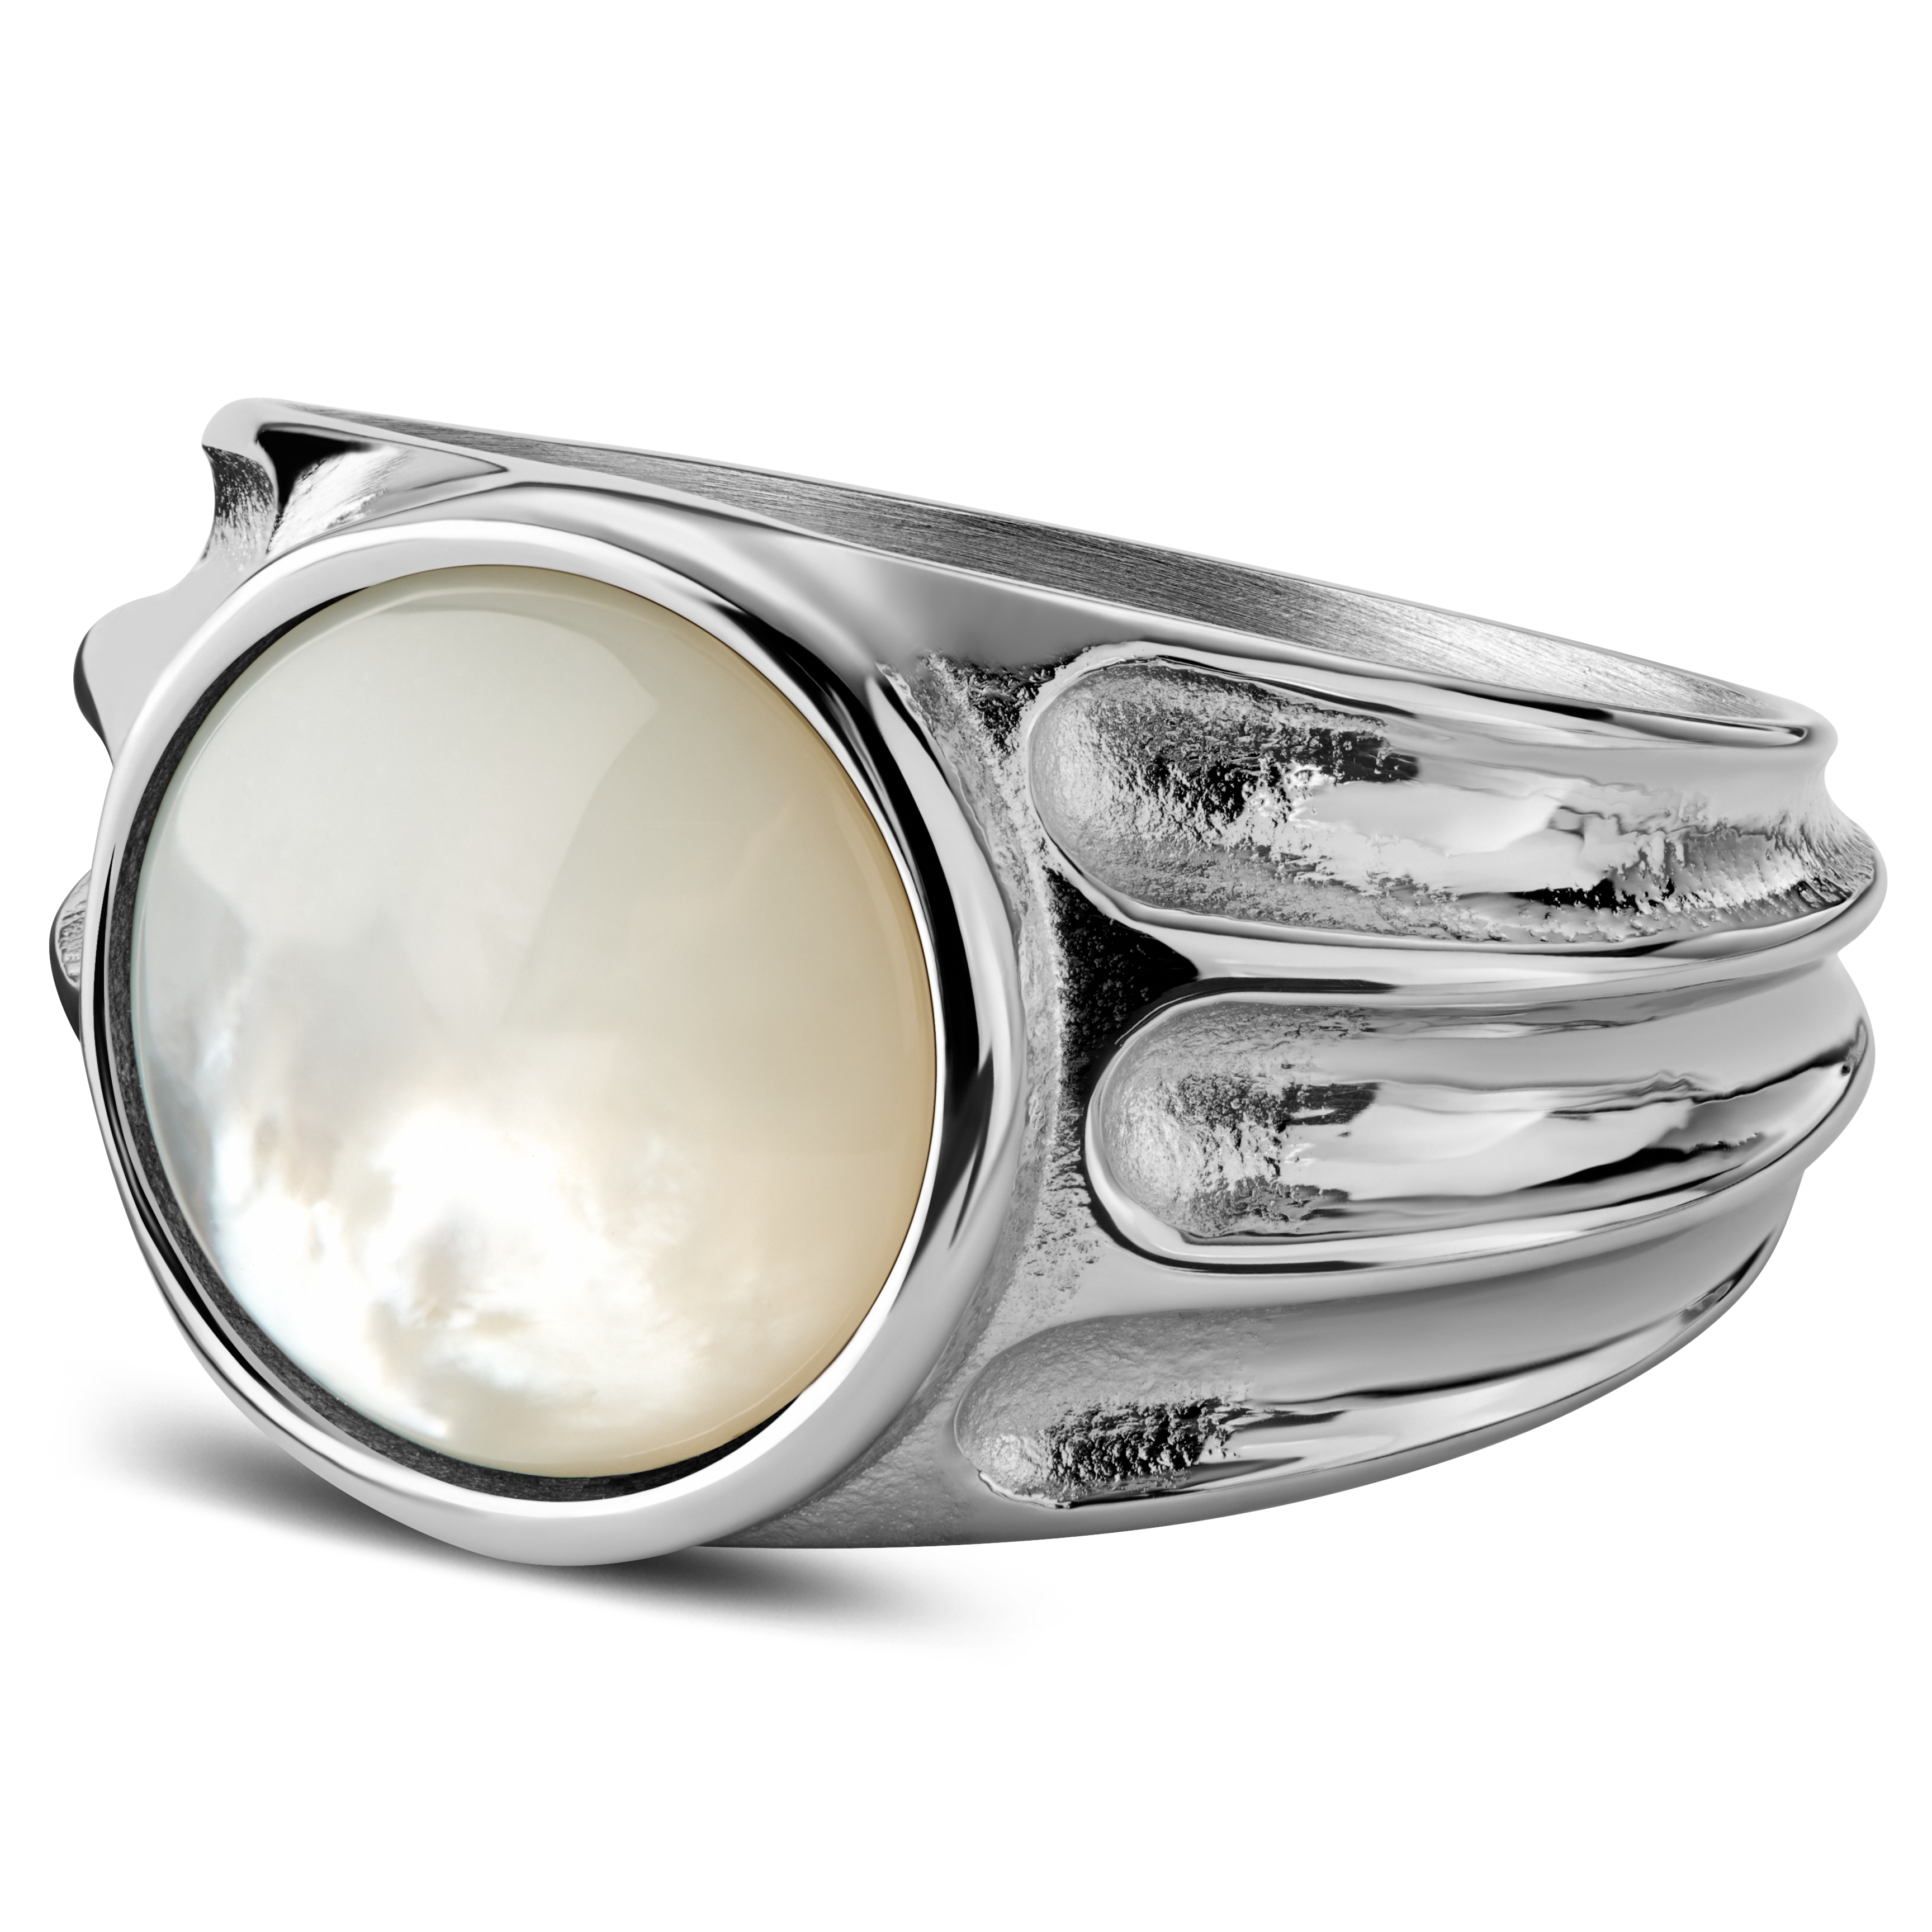 Jewelryonclick 5 Carat Natural Pearl 925 Sterling Silver Men Women Ring  Size In US 5,6,7,8,9,10,11,12,13|Amazon.com